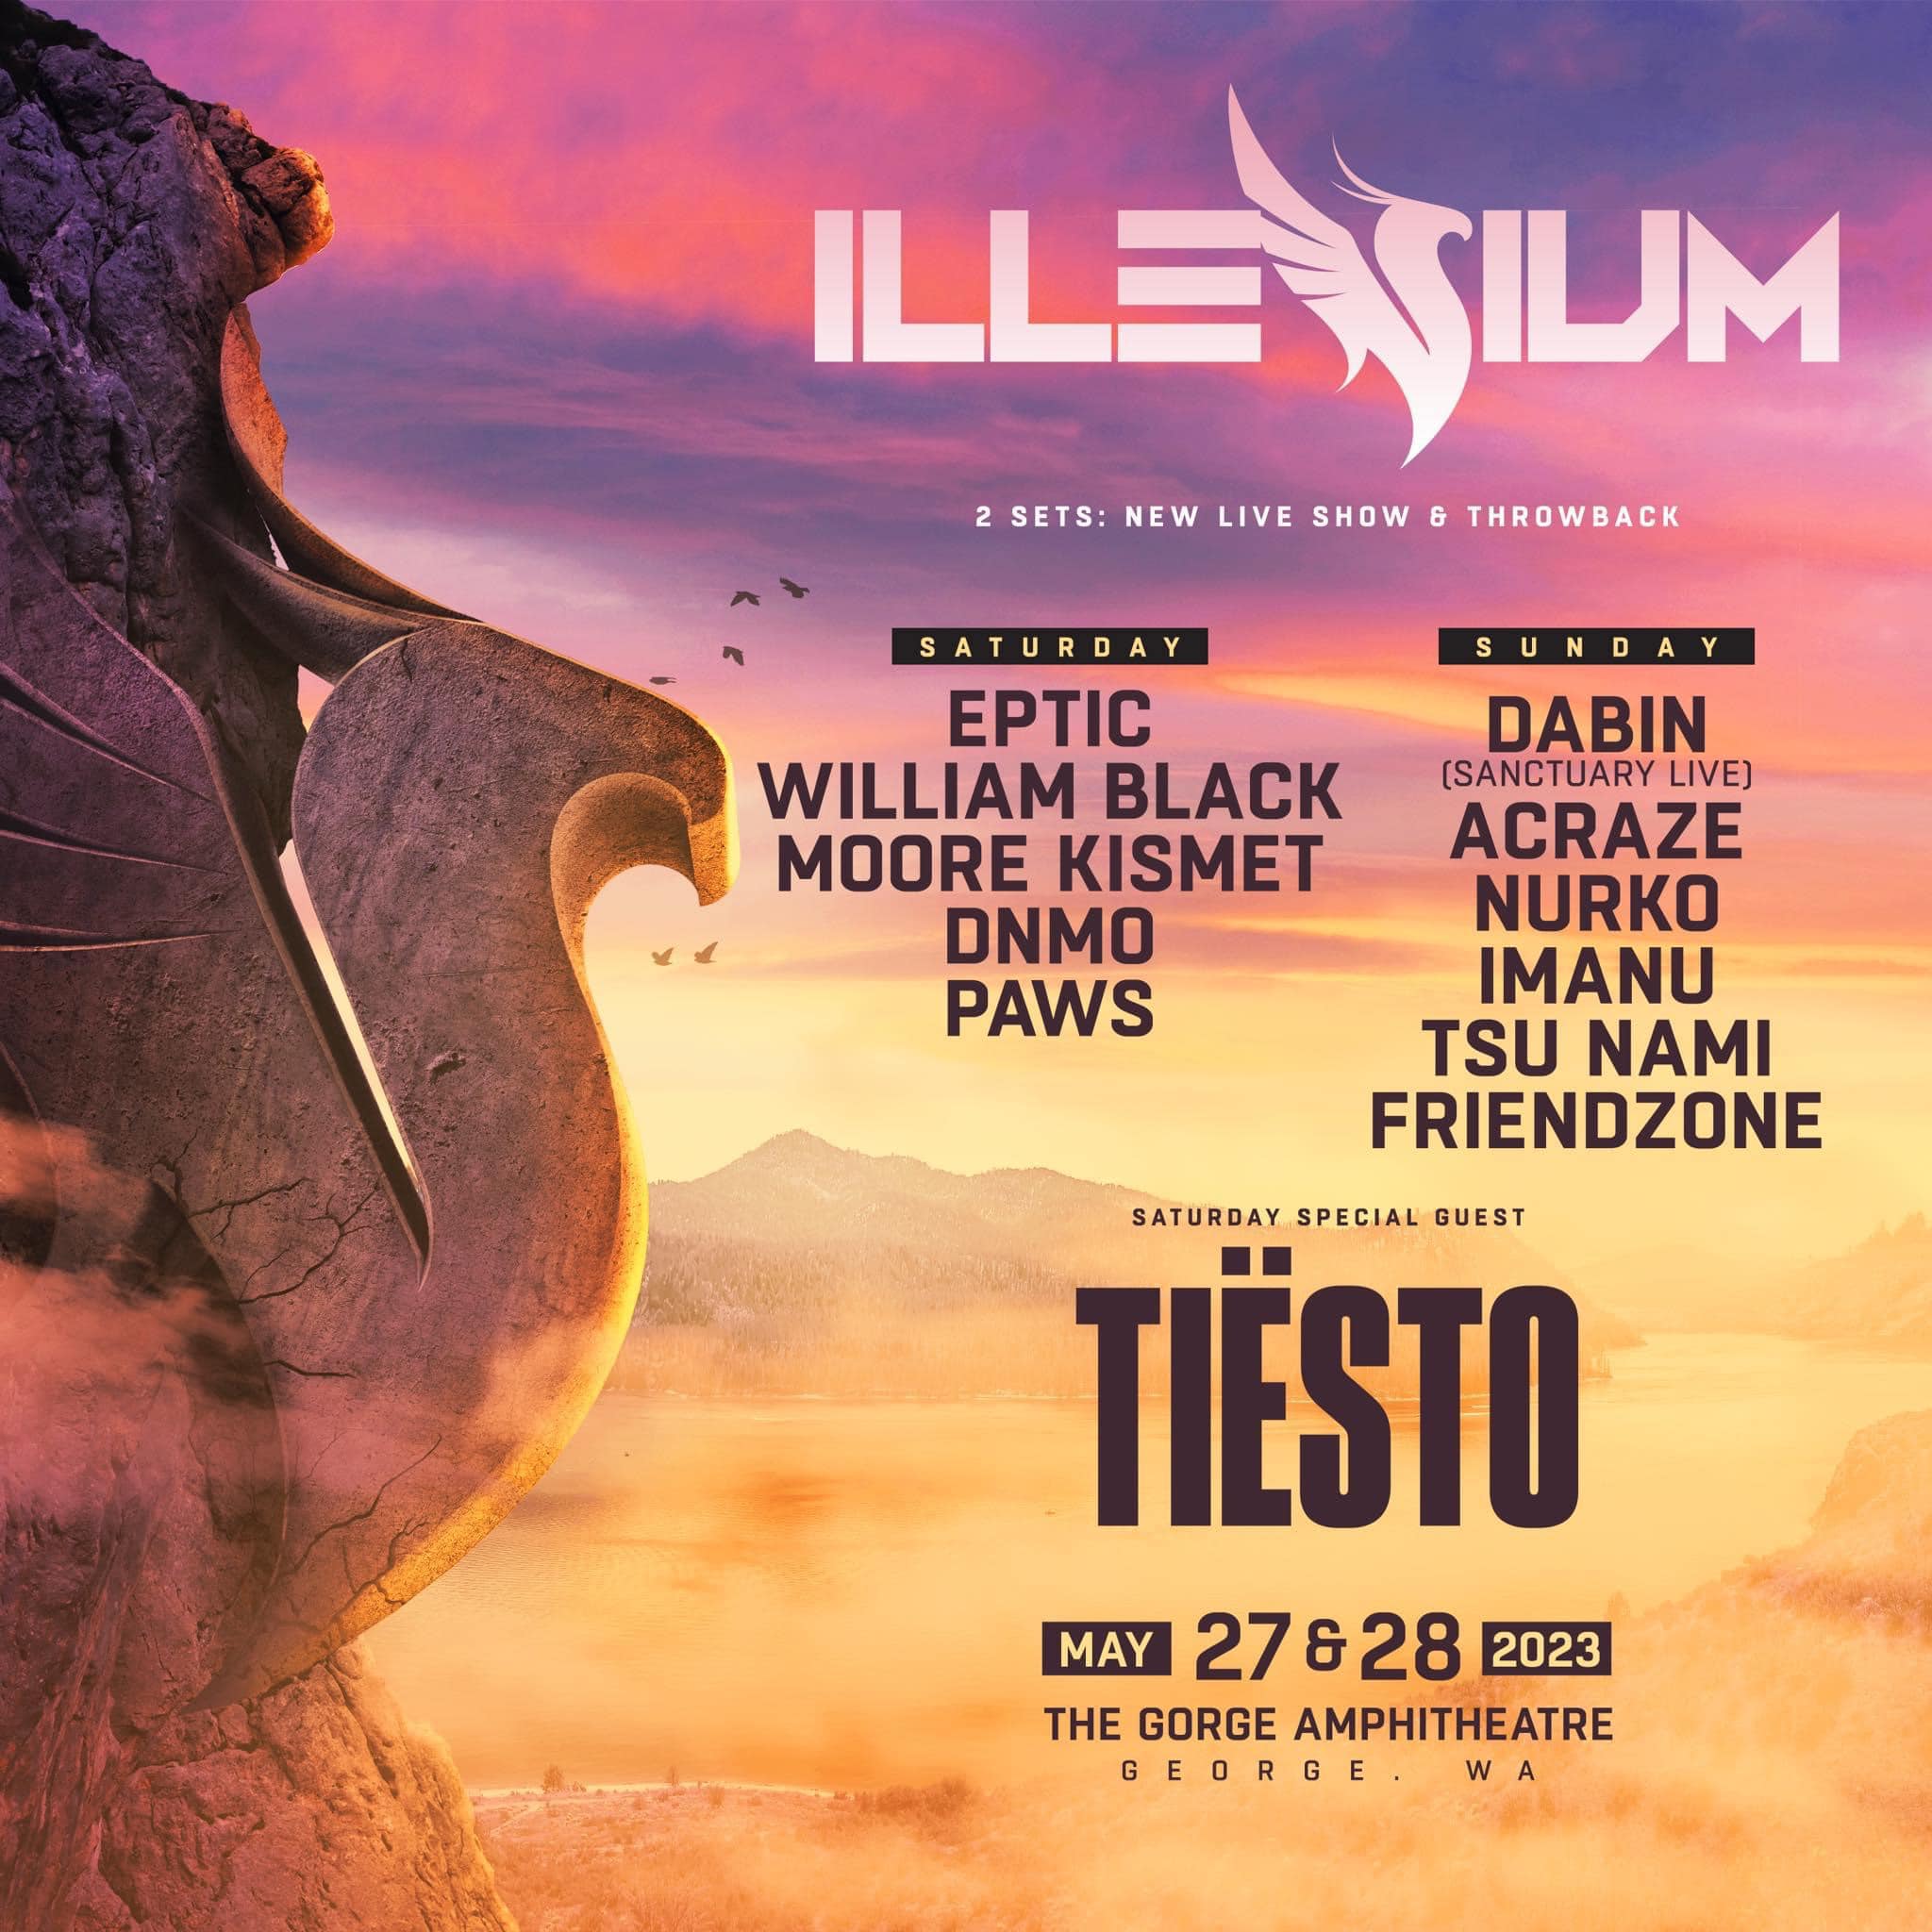 Illenium: Memorial Day Weekend at The Gorge